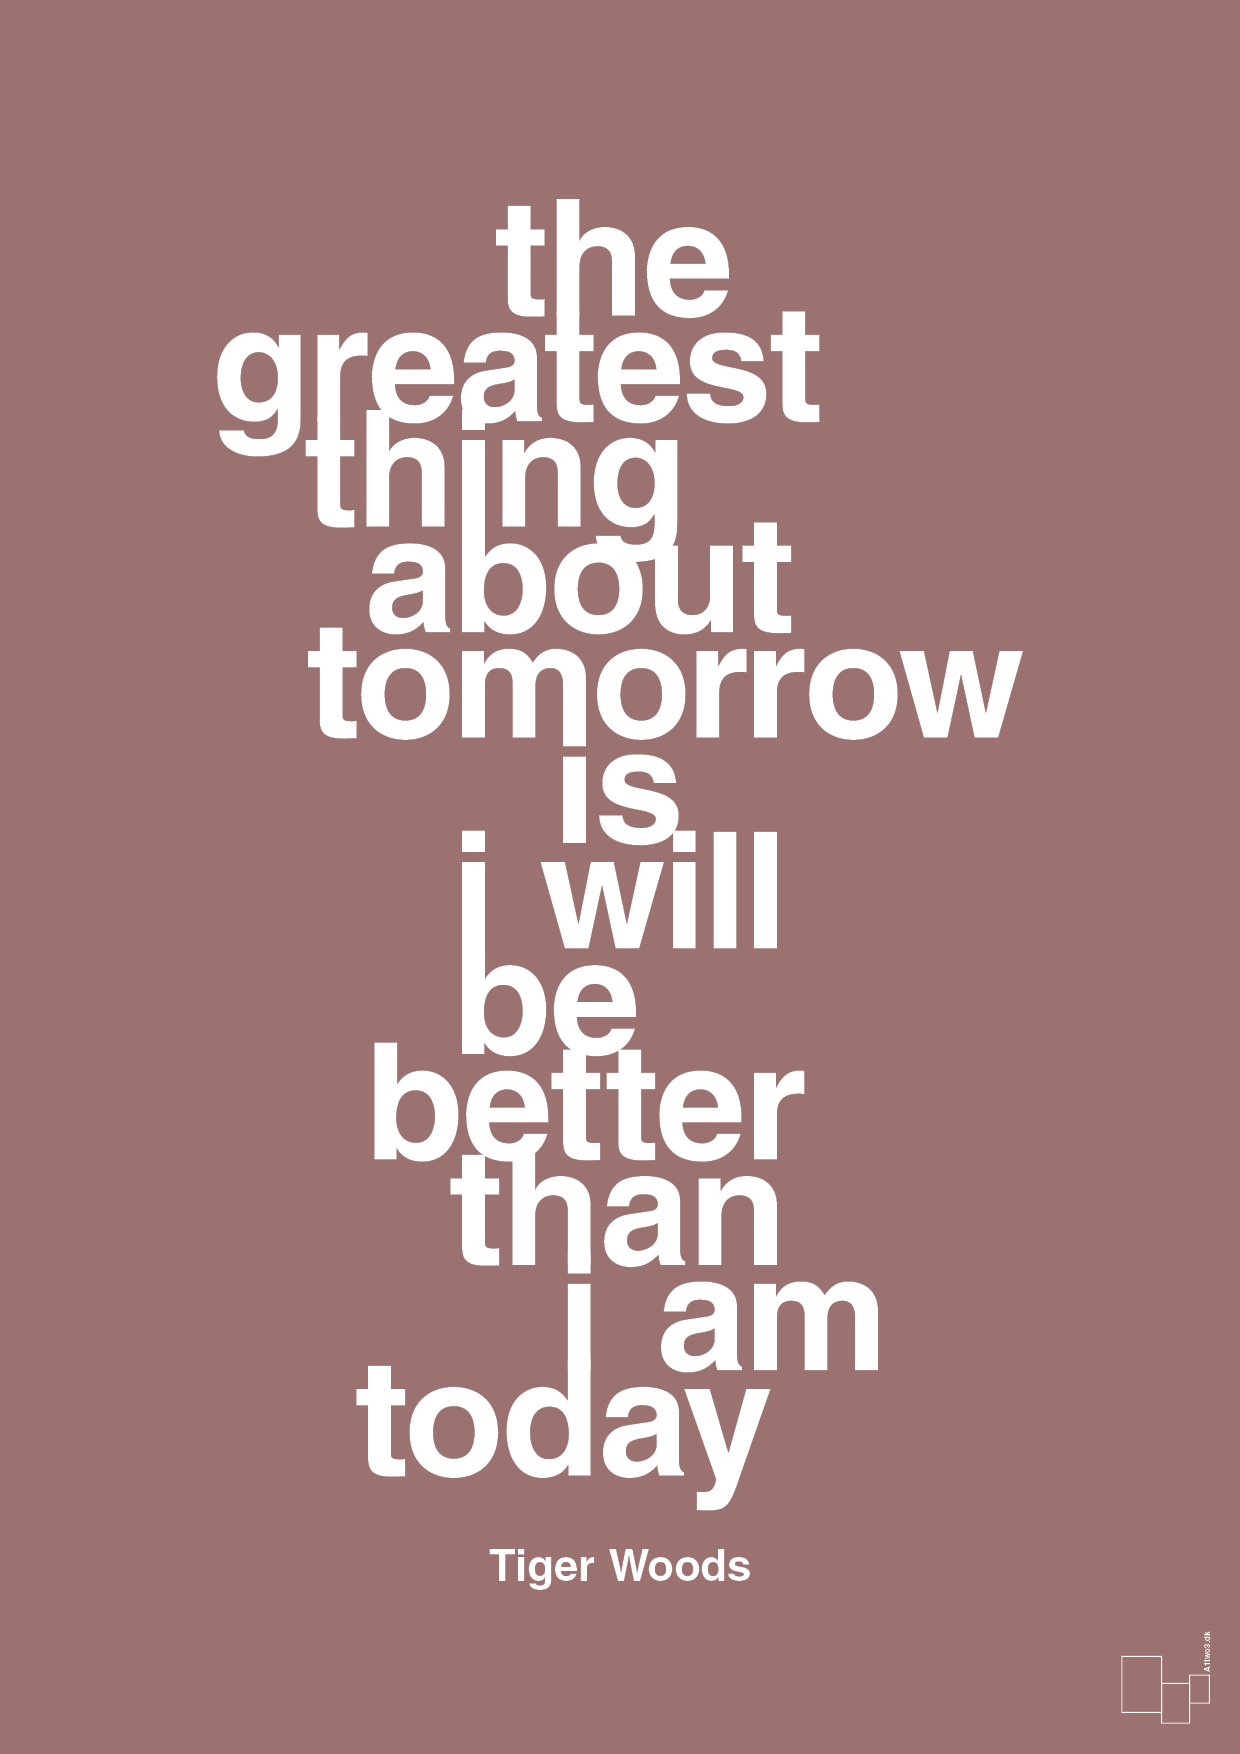 the greatest thing about tomorrow is i will be better than i am today - Plakat med Citater i Plum